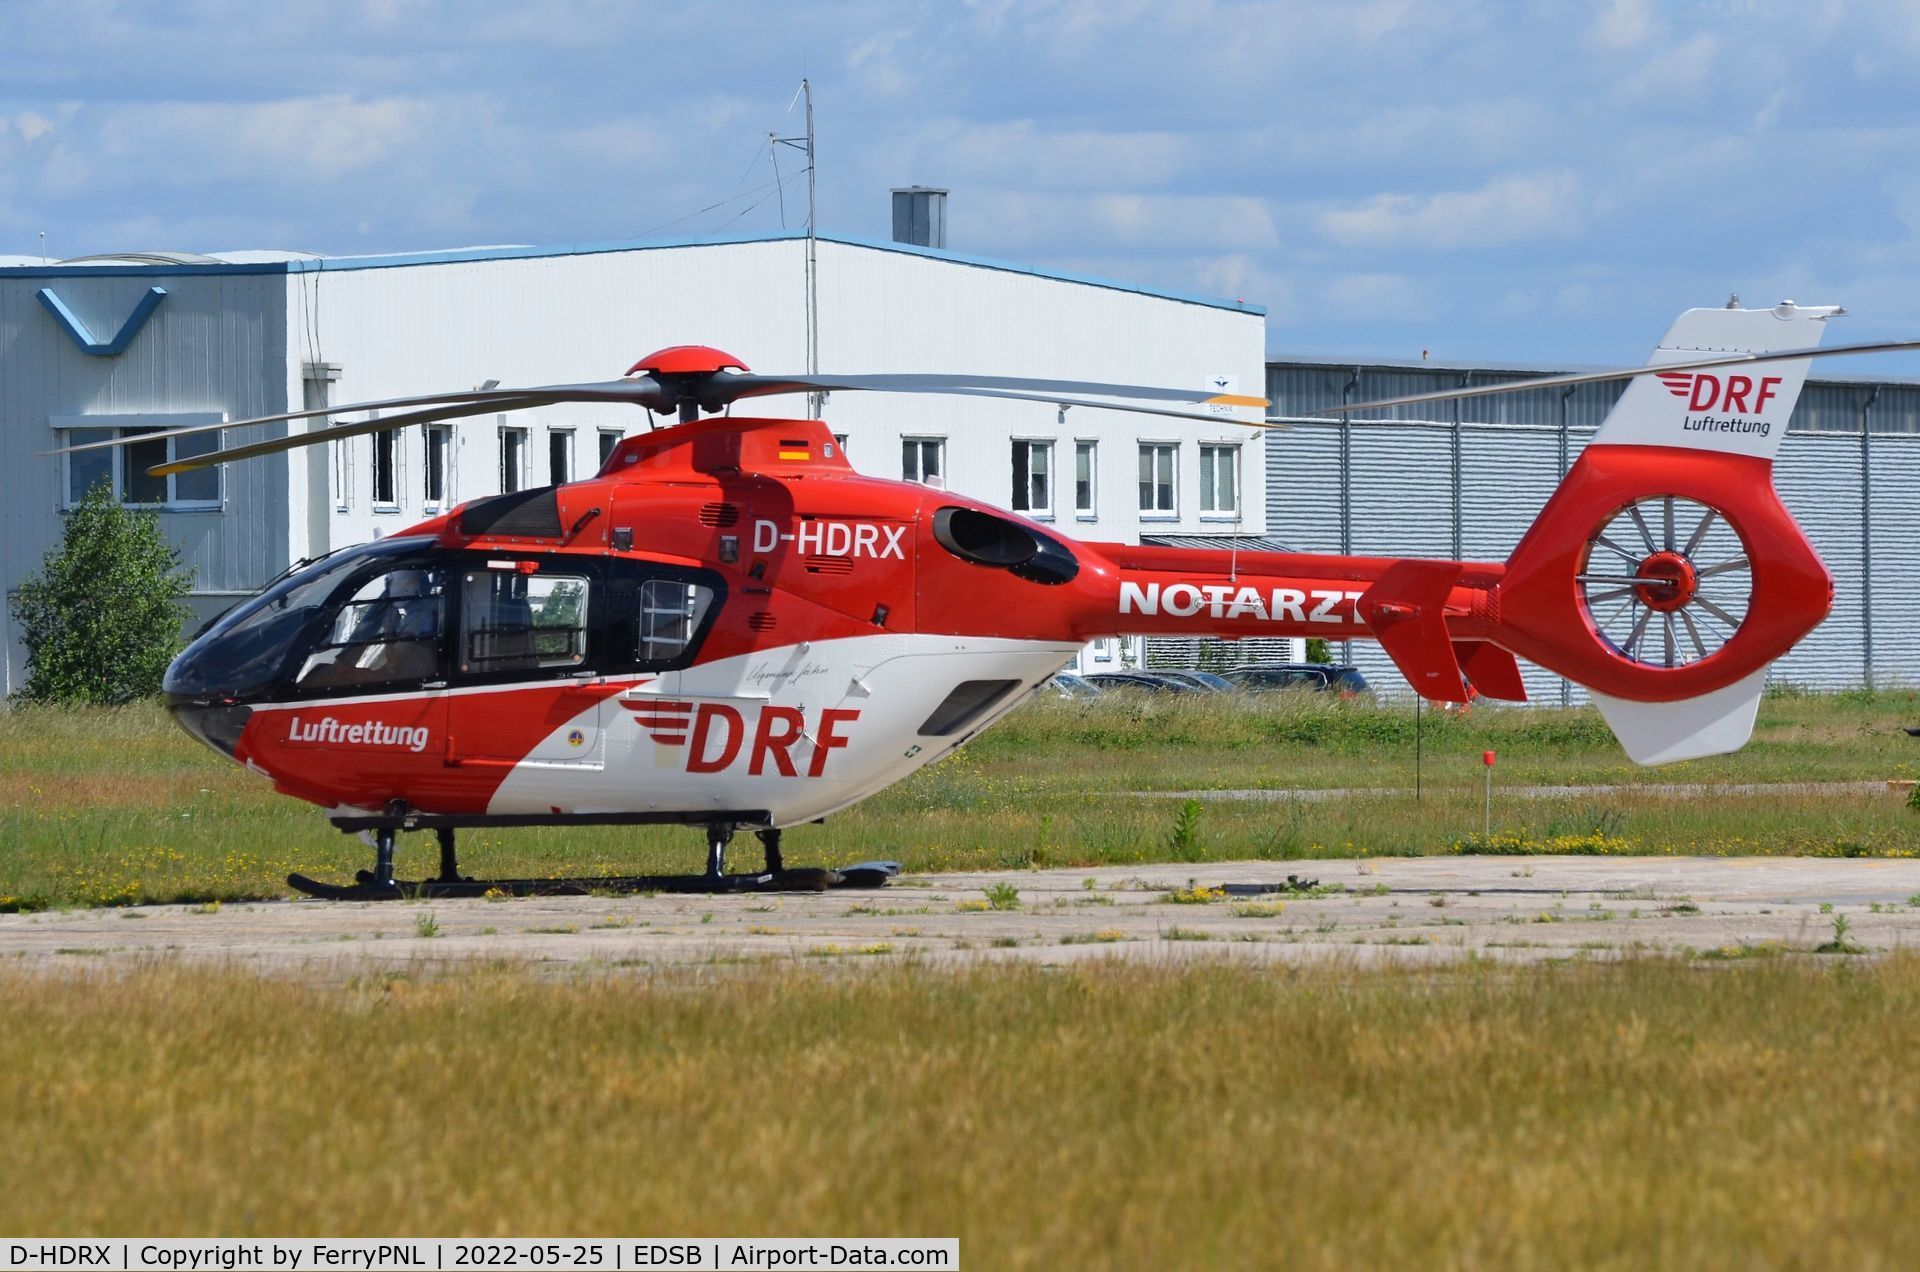 D-HDRX, 2010 Eurocopter EC-135P-2+ C/N 0881, DRF EC135 about to make a test flight